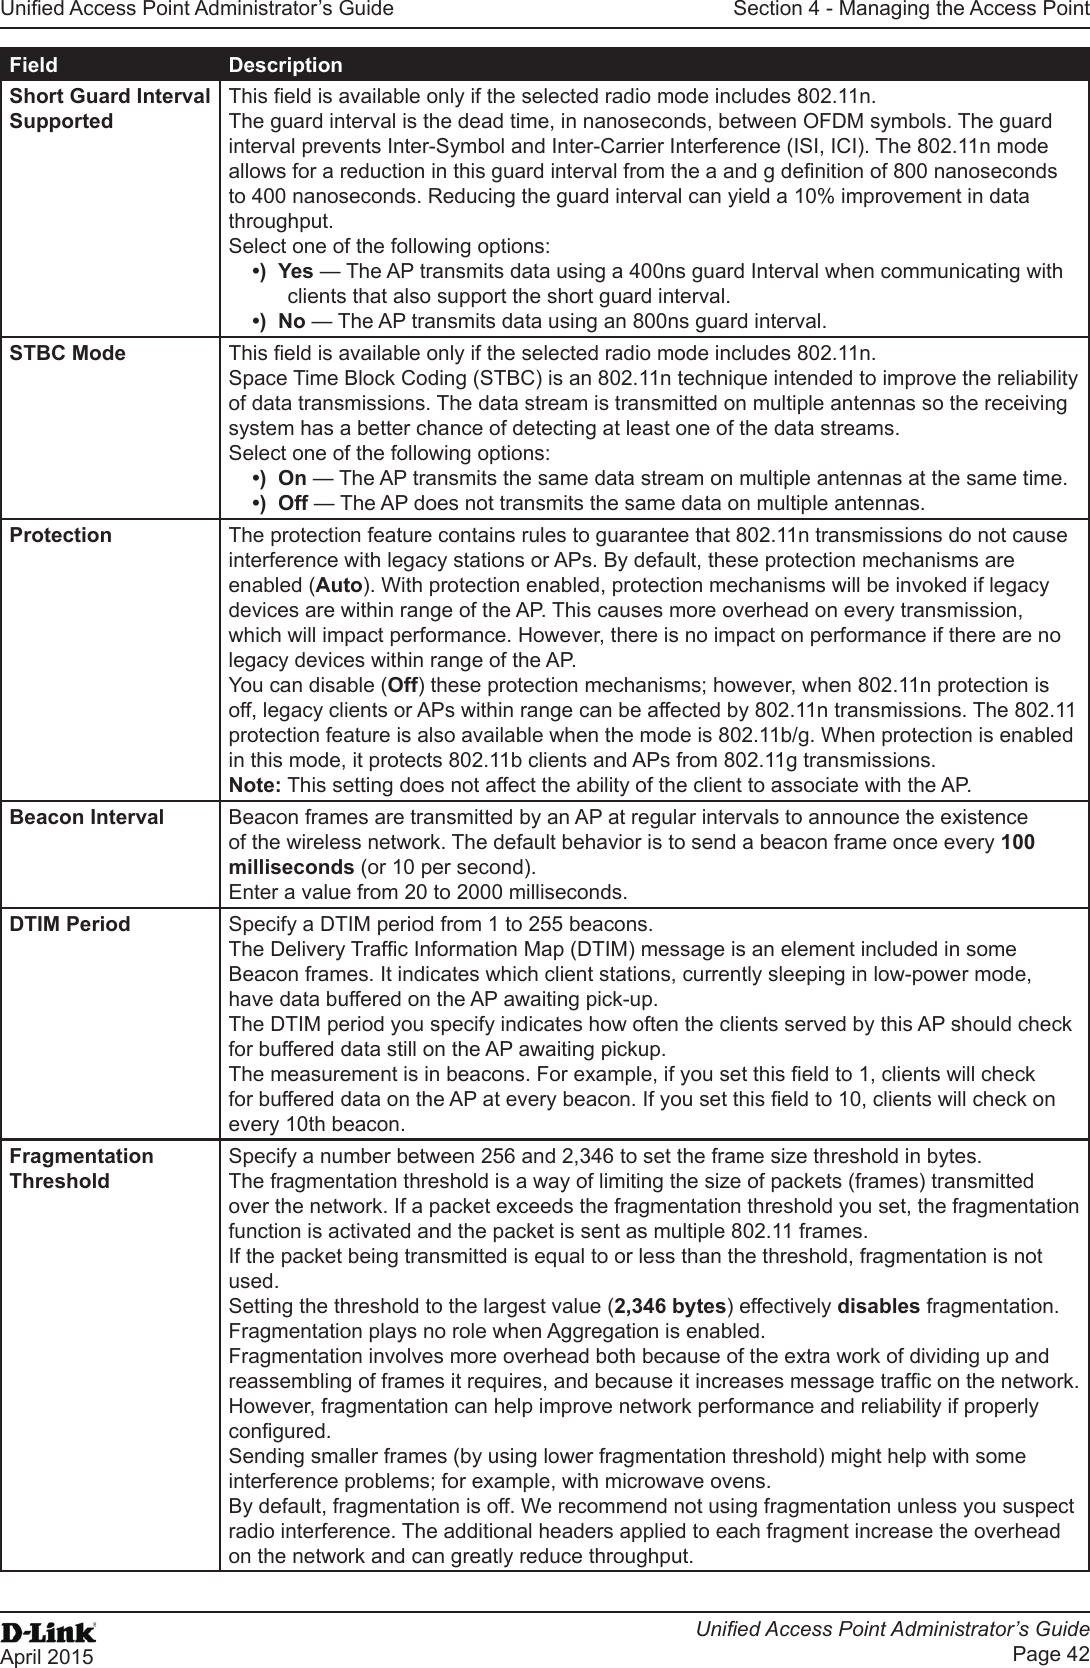 Unied Access Point Administrator’s GuideUnied Access Point Administrator’s GuidePage 42April 2015Section 4 - Managing the Access PointField DescriptionShort Guard Interval SupportedThis eld is available only if the selected radio mode includes 802.11n. The guard interval is the dead time, in nanoseconds, between OFDM symbols. The guard interval prevents Inter-Symbol and Inter-Carrier Interference (ISI, ICI). The 802.11n mode allows for a reduction in this guard interval from the a and g denition of 800 nanoseconds to 400 nanoseconds. Reducing the guard interval can yield a 10% improvement in data throughput. Select one of the following options:•)  Yes — The AP transmits data using a 400ns guard Interval when communicating with clients that also support the short guard interval. •)  No — The AP transmits data using an 800ns guard interval.STBC Mode This eld is available only if the selected radio mode includes 802.11n. Space Time Block Coding (STBC) is an 802.11n technique intended to improve the reliability of data transmissions. The data stream is transmitted on multiple antennas so the receiving system has a better chance of detecting at least one of the data streams.Select one of the following options:•)  On — The AP transmits the same data stream on multiple antennas at the same time.•)  Off — The AP does not transmits the same data on multiple antennas.Protection The protection feature contains rules to guarantee that 802.11n transmissions do not cause interference with legacy stations or APs. By default, these protection mechanisms are enabled (Auto). With protection enabled, protection mechanisms will be invoked if legacy devices are within range of the AP. This causes more overhead on every transmission, which will impact performance. However, there is no impact on performance if there are no legacy devices within range of the AP.You can disable (Off) these protection mechanisms; however, when 802.11n protection is off, legacy clients or APs within range can be affected by 802.11n transmissions. The 802.11 protection feature is also available when the mode is 802.11b/g. When protection is enabled in this mode, it protects 802.11b clients and APs from 802.11g transmissions. Note: This setting does not affect the ability of the client to associate with the AP.Beacon Interval Beacon frames are transmitted by an AP at regular intervals to announce the existence of the wireless network. The default behavior is to send a beacon frame once every 100 milliseconds (or 10 per second).Enter a value from 20 to 2000 milliseconds.DTIM Period Specify a DTIM period from 1 to 255 beacons.The Delivery Trafc Information Map (DTIM) message is an element included in some Beacon frames. It indicates which client stations, currently sleeping in low-power mode, have data buffered on the AP awaiting pick-up.The DTIM period you specify indicates how often the clients served by this AP should check for buffered data still on the AP awaiting pickup.The measurement is in beacons. For example, if you set this eld to 1, clients will check for buffered data on the AP at every beacon. If you set this eld to 10, clients will check on every 10th beacon.Fragmentation ThresholdSpecify a number between 256 and 2,346 to set the frame size threshold in bytes. The fragmentation threshold is a way of limiting the size of packets (frames) transmitted over the network. If a packet exceeds the fragmentation threshold you set, the fragmentation function is activated and the packet is sent as multiple 802.11 frames.If the packet being transmitted is equal to or less than the threshold, fragmentation is not used.Setting the threshold to the largest value (2,346 bytes) effectively disables fragmentation. Fragmentation plays no role when Aggregation is enabled.Fragmentation involves more overhead both because of the extra work of dividing up and reassembling of frames it requires, and because it increases message trafc on the network. However, fragmentation can help improve network performance and reliability if properly congured.Sending smaller frames (by using lower fragmentation threshold) might help with some interference problems; for example, with microwave ovens.By default, fragmentation is off. We recommend not using fragmentation unless you suspect radio interference. The additional headers applied to each fragment increase the overhead on the network and can greatly reduce throughput.